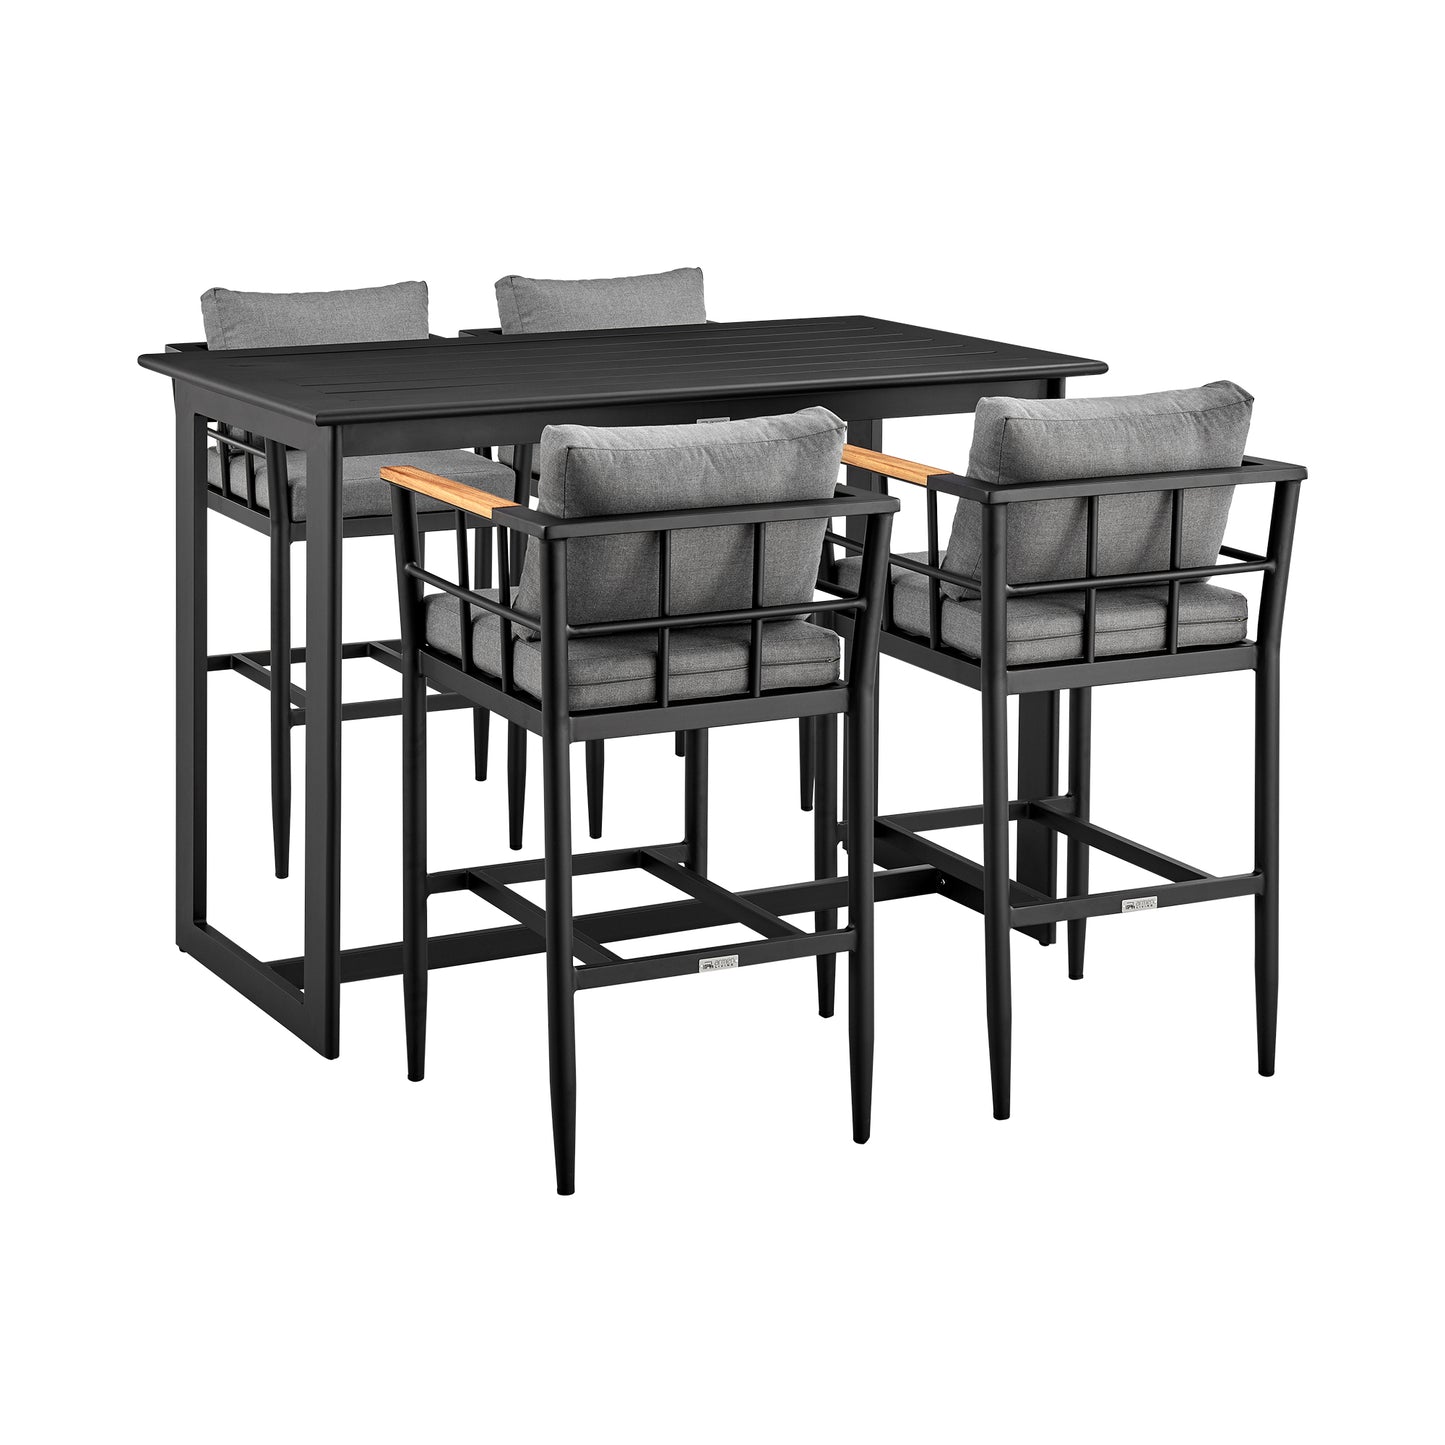 Wiglaf Outdoor Patio 5-Piece Bar Table Set in Aluminum with Gray Cushions